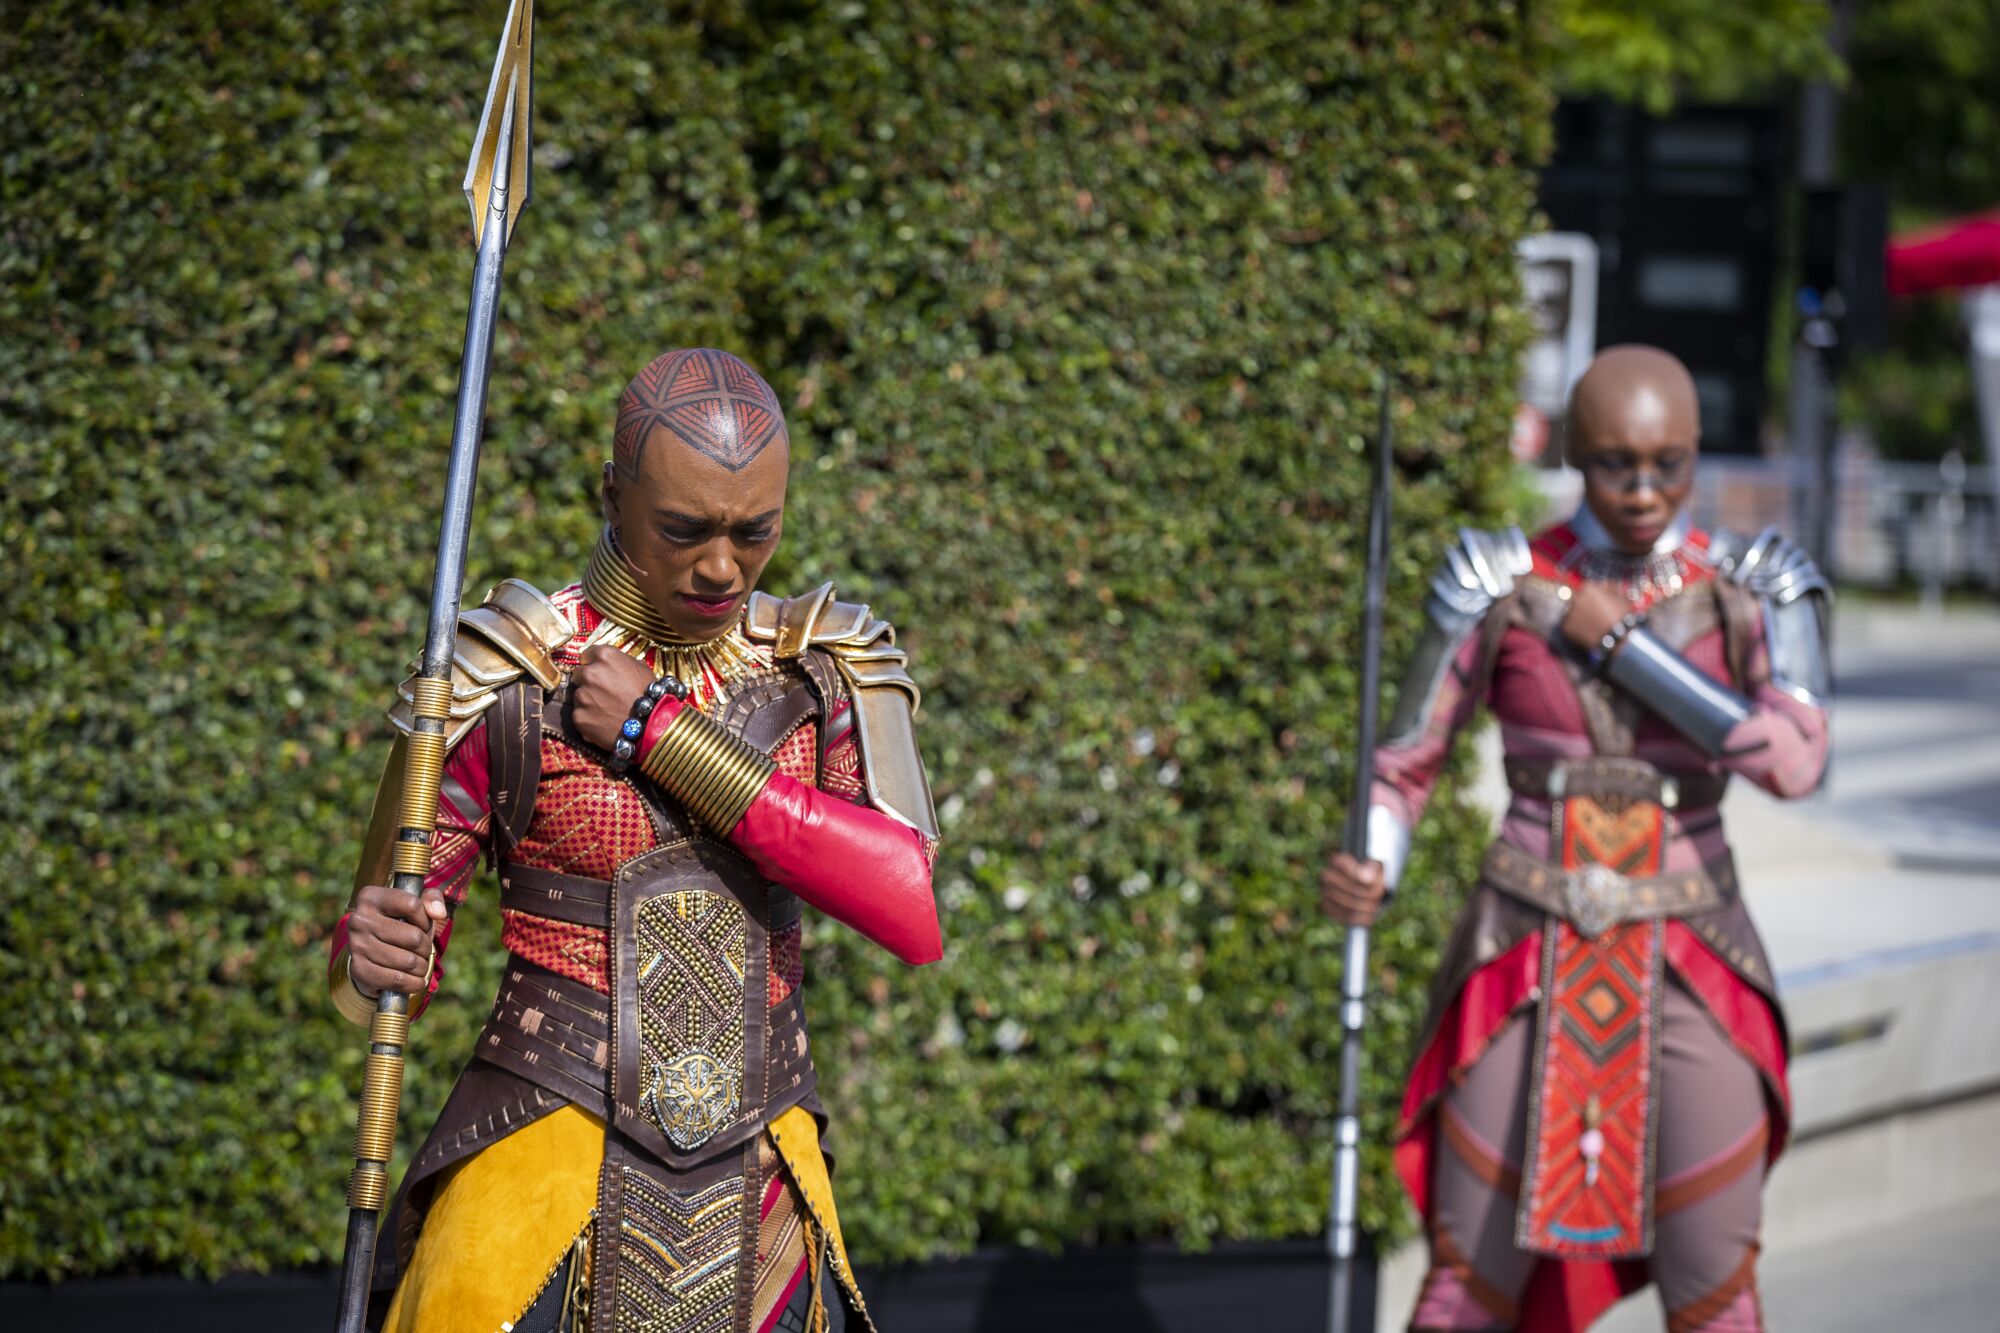 Black Panther's Dora Milaje perform during a media preview of Avengers Campus at California Adventure 